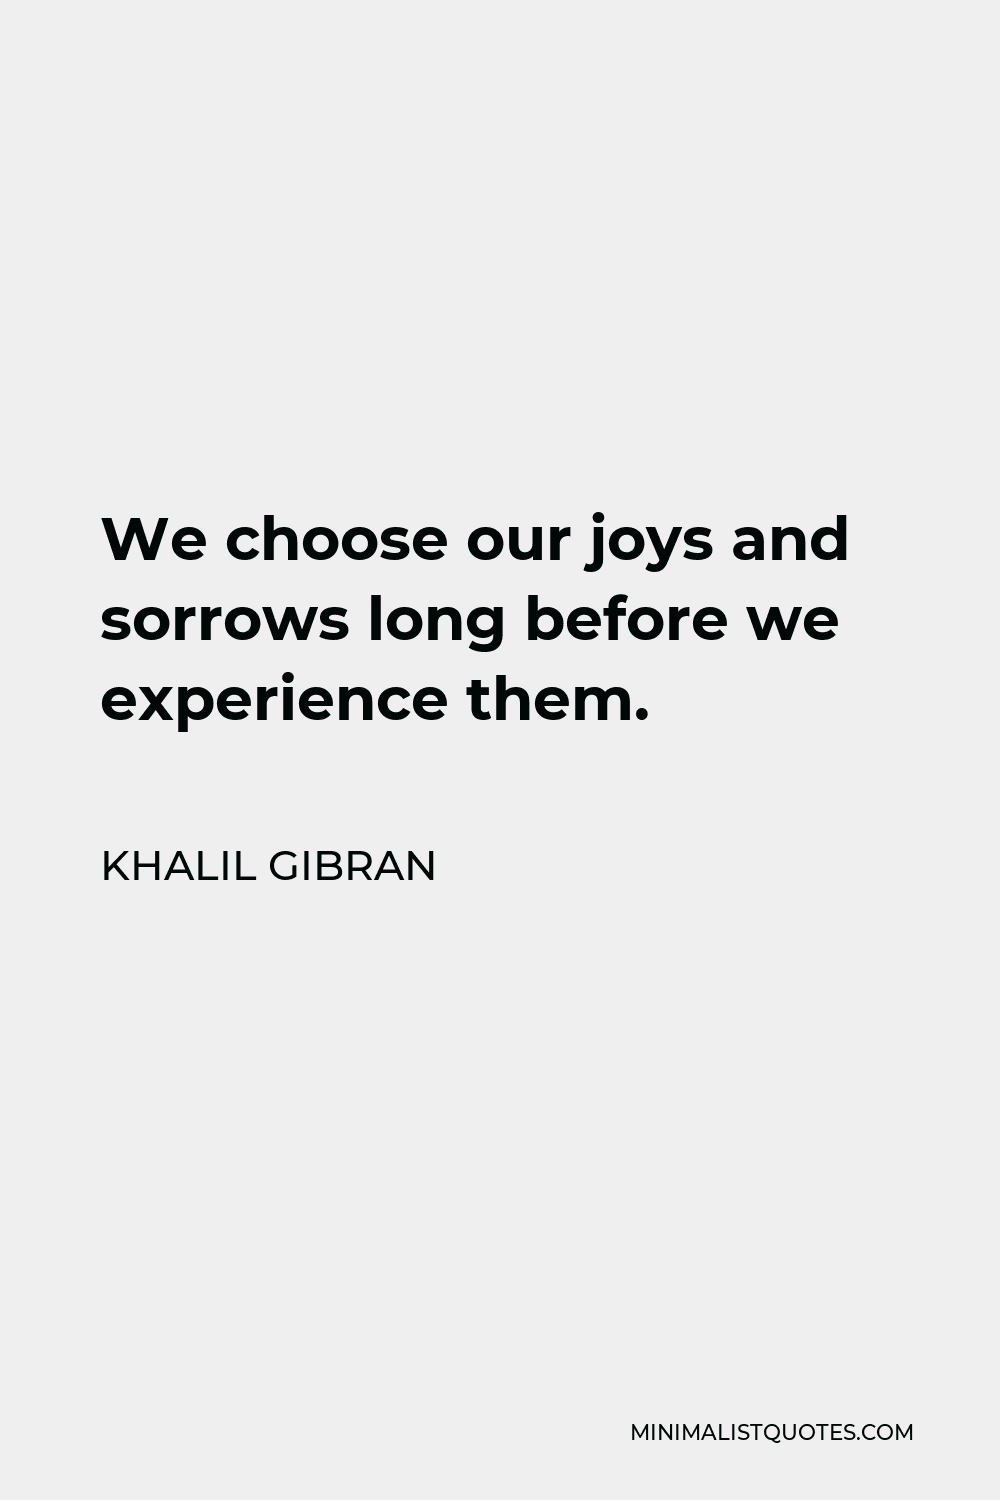 Khalil Gibran Quote - We choose our joys and sorrows long before we experience them.